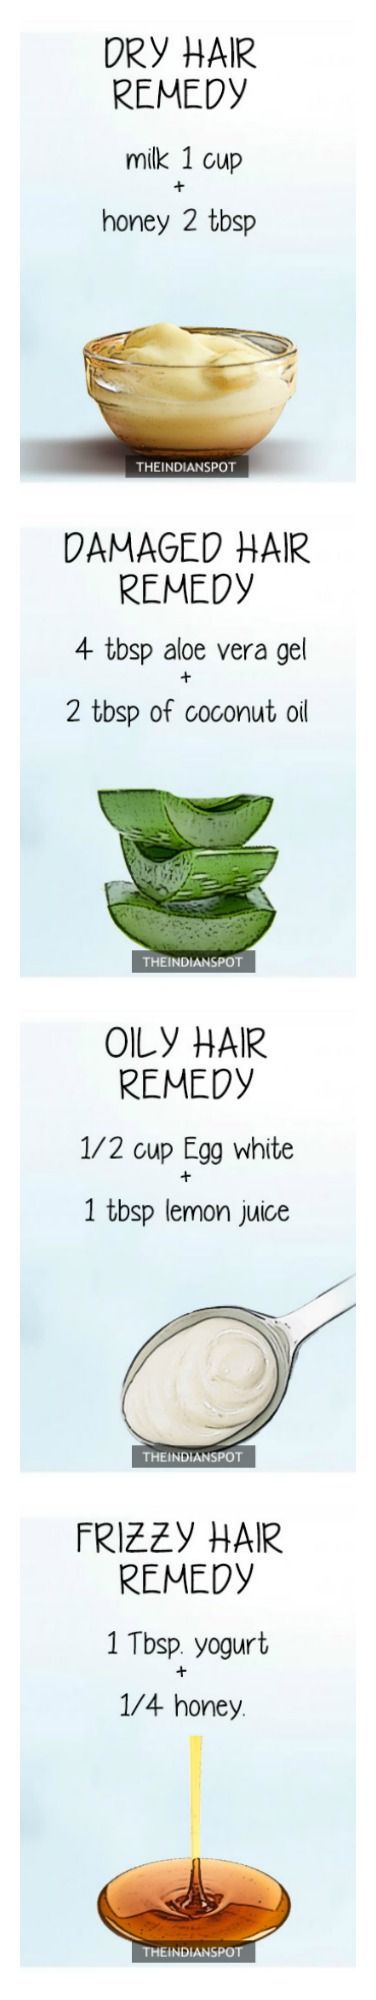 TOP 10 NATURAL REMEDIES FOR EVERY HAIR PROBLEM